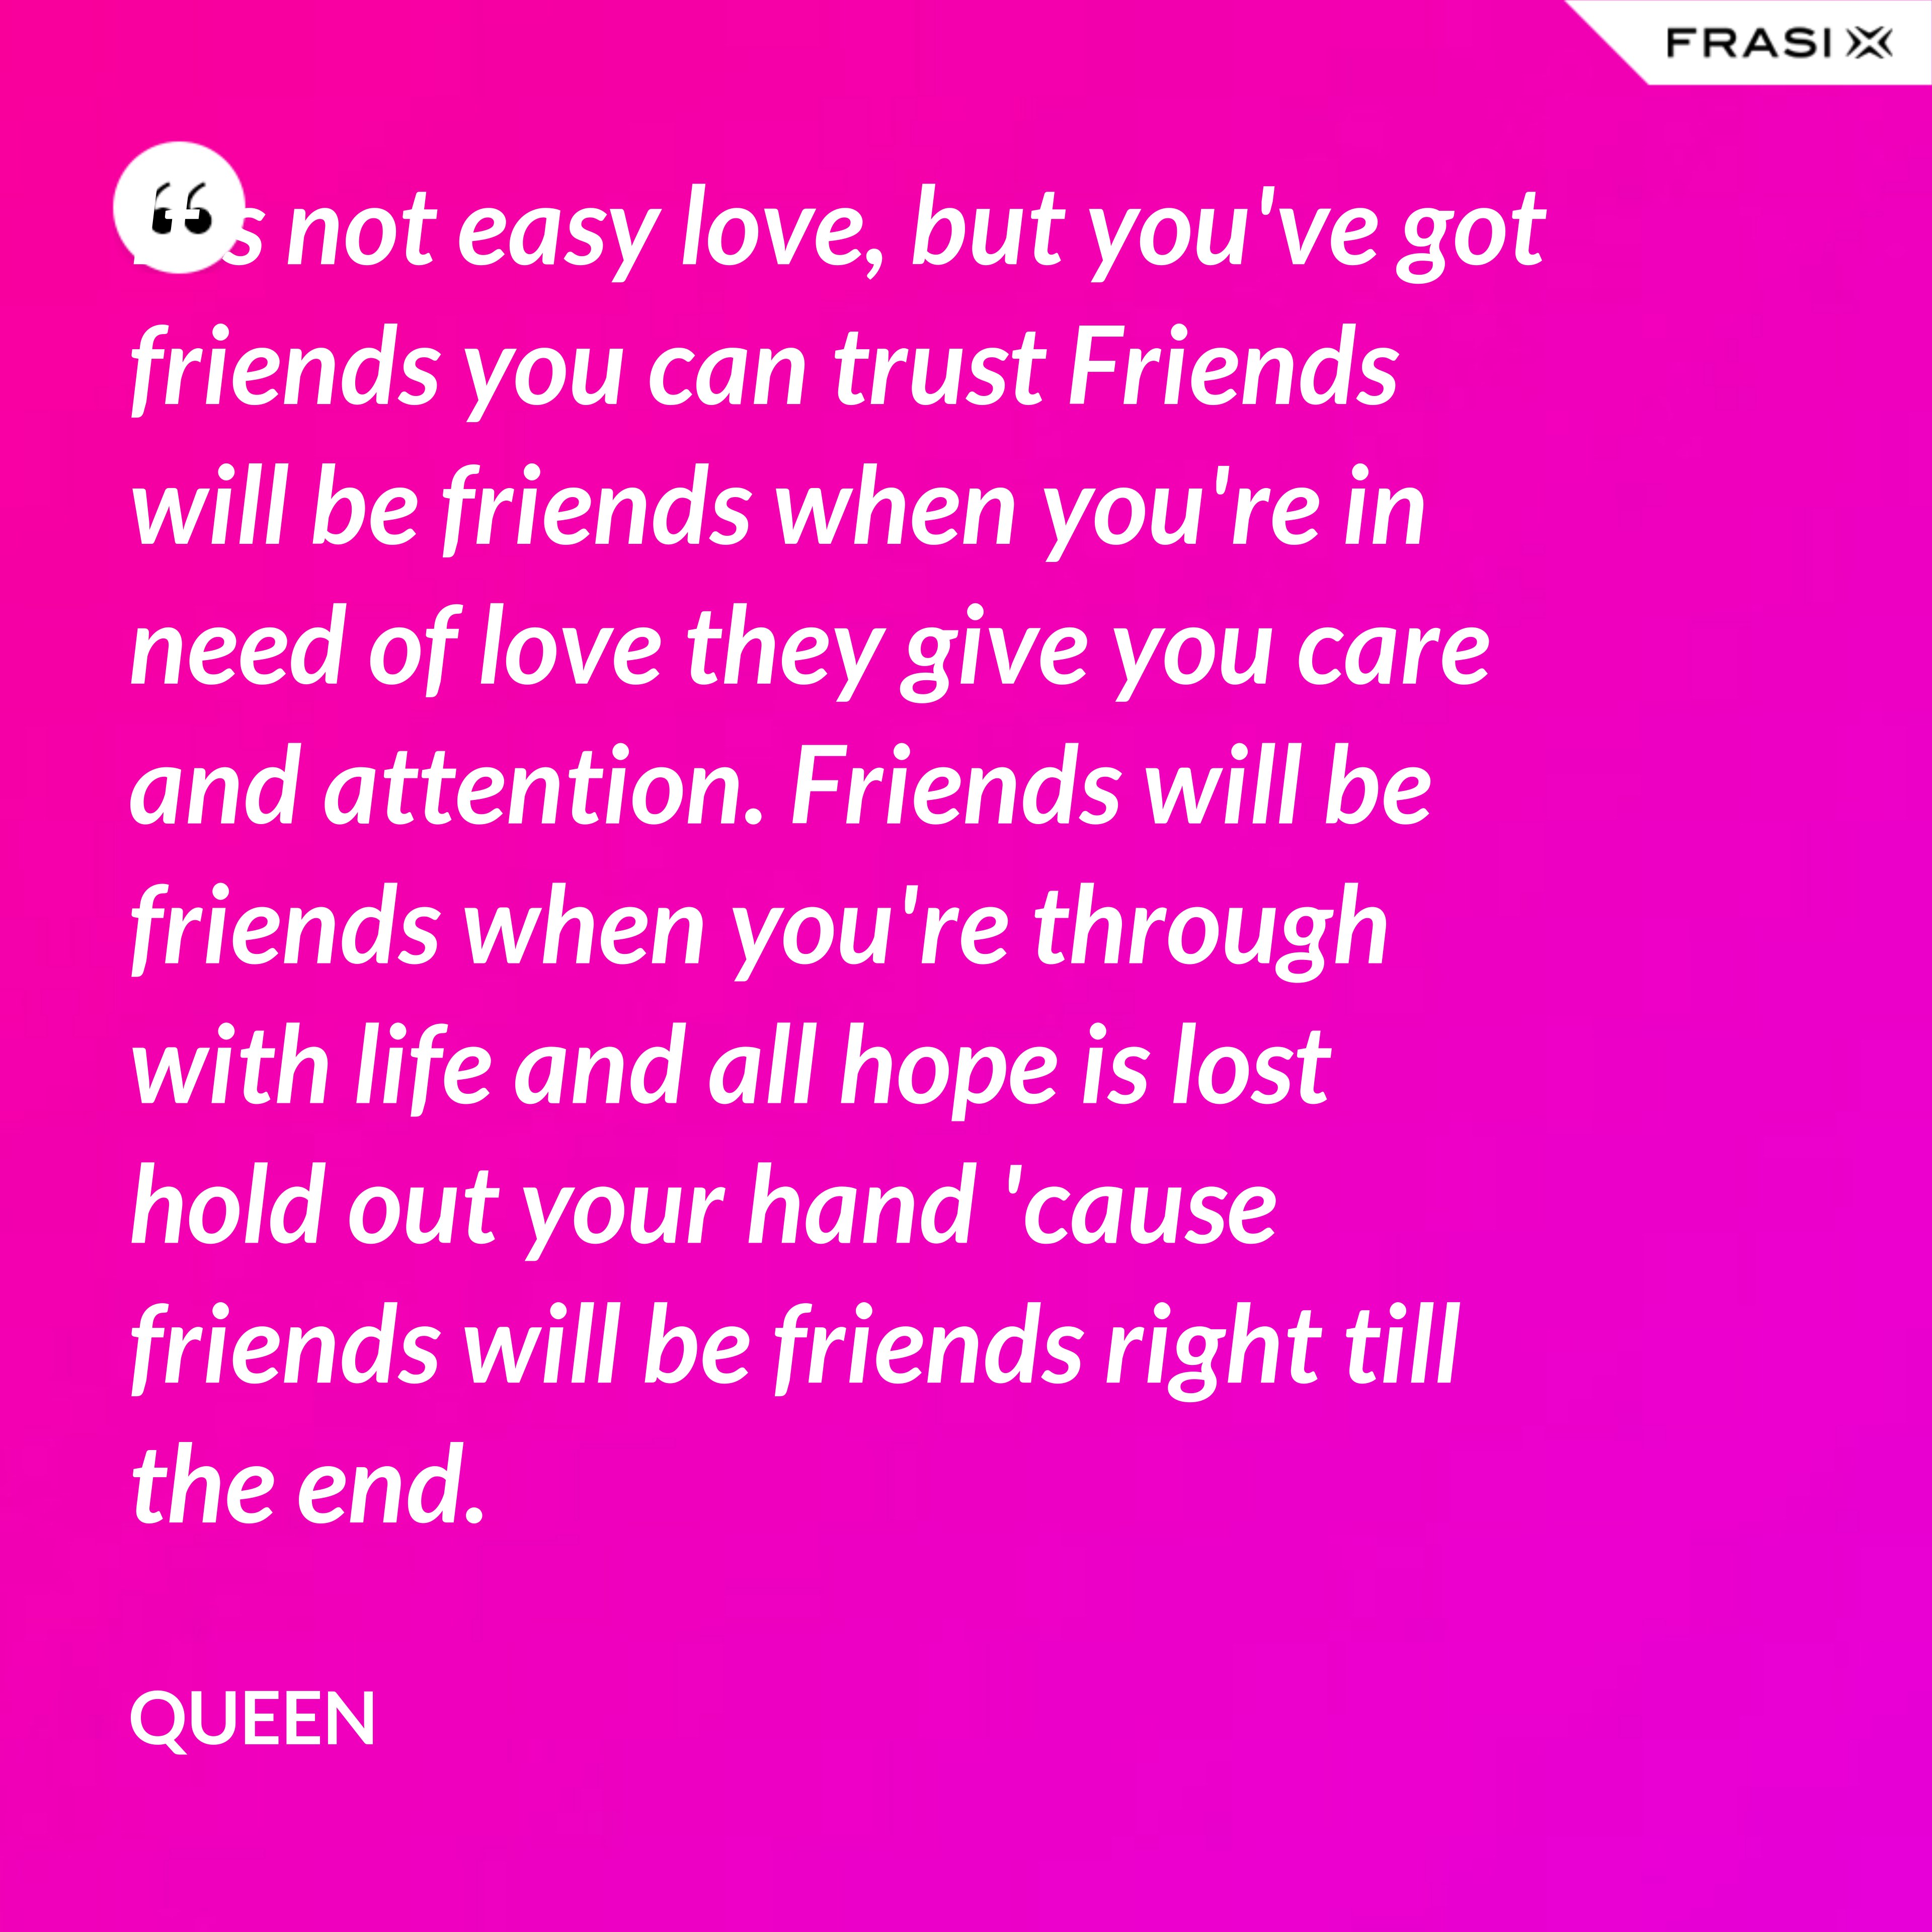 It's not easy love, but you've got friends you can trust Friends will be friends when you're in need of love they give you care and attention. Friends will be friends when you're through with life and all hope is lost hold out your hand 'cause friends will be friends right till the end. - Queen